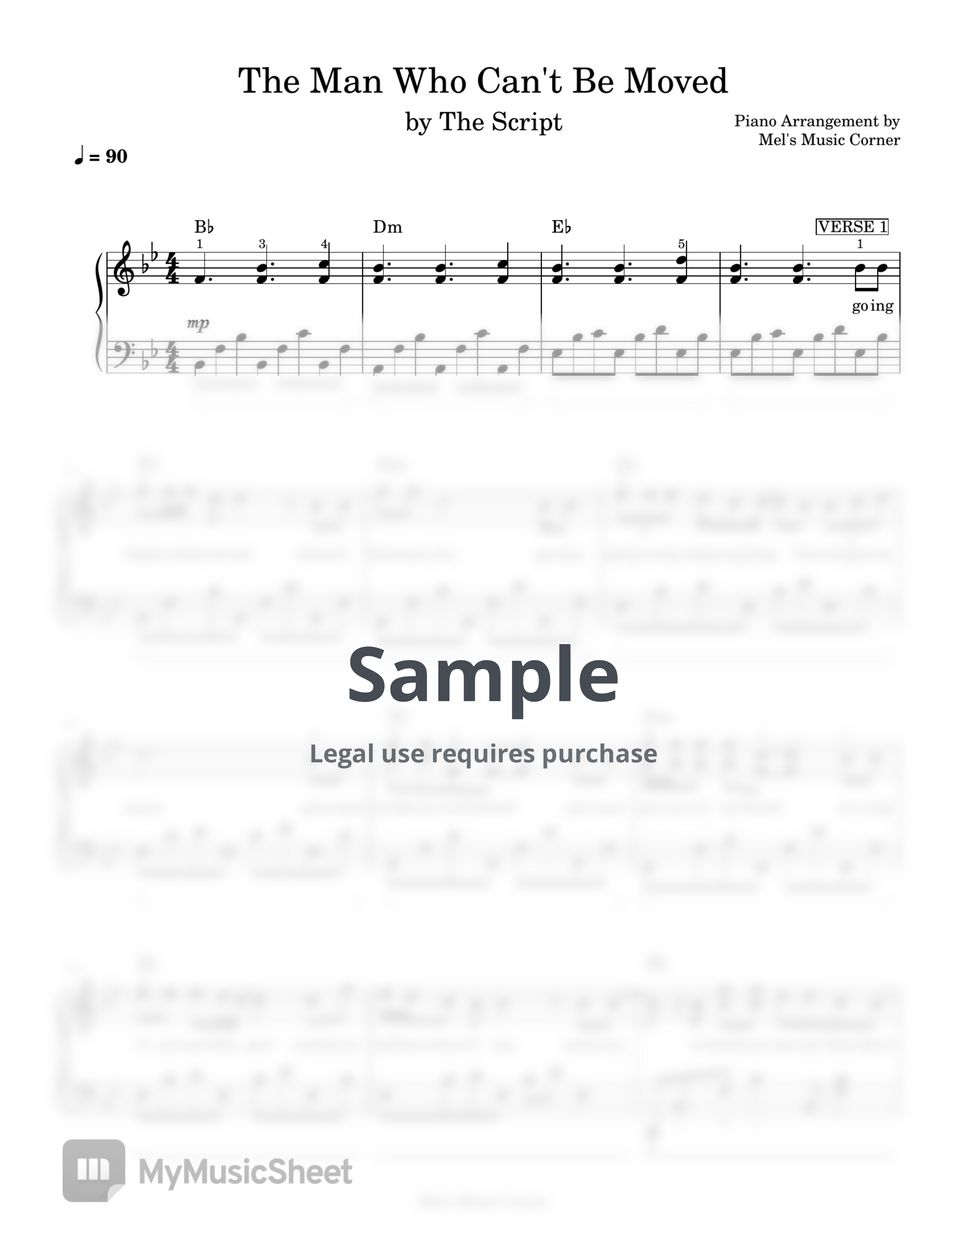 The Script - The Man Who Can't Be Moved (piano sheet music) by Mel's Music Corner